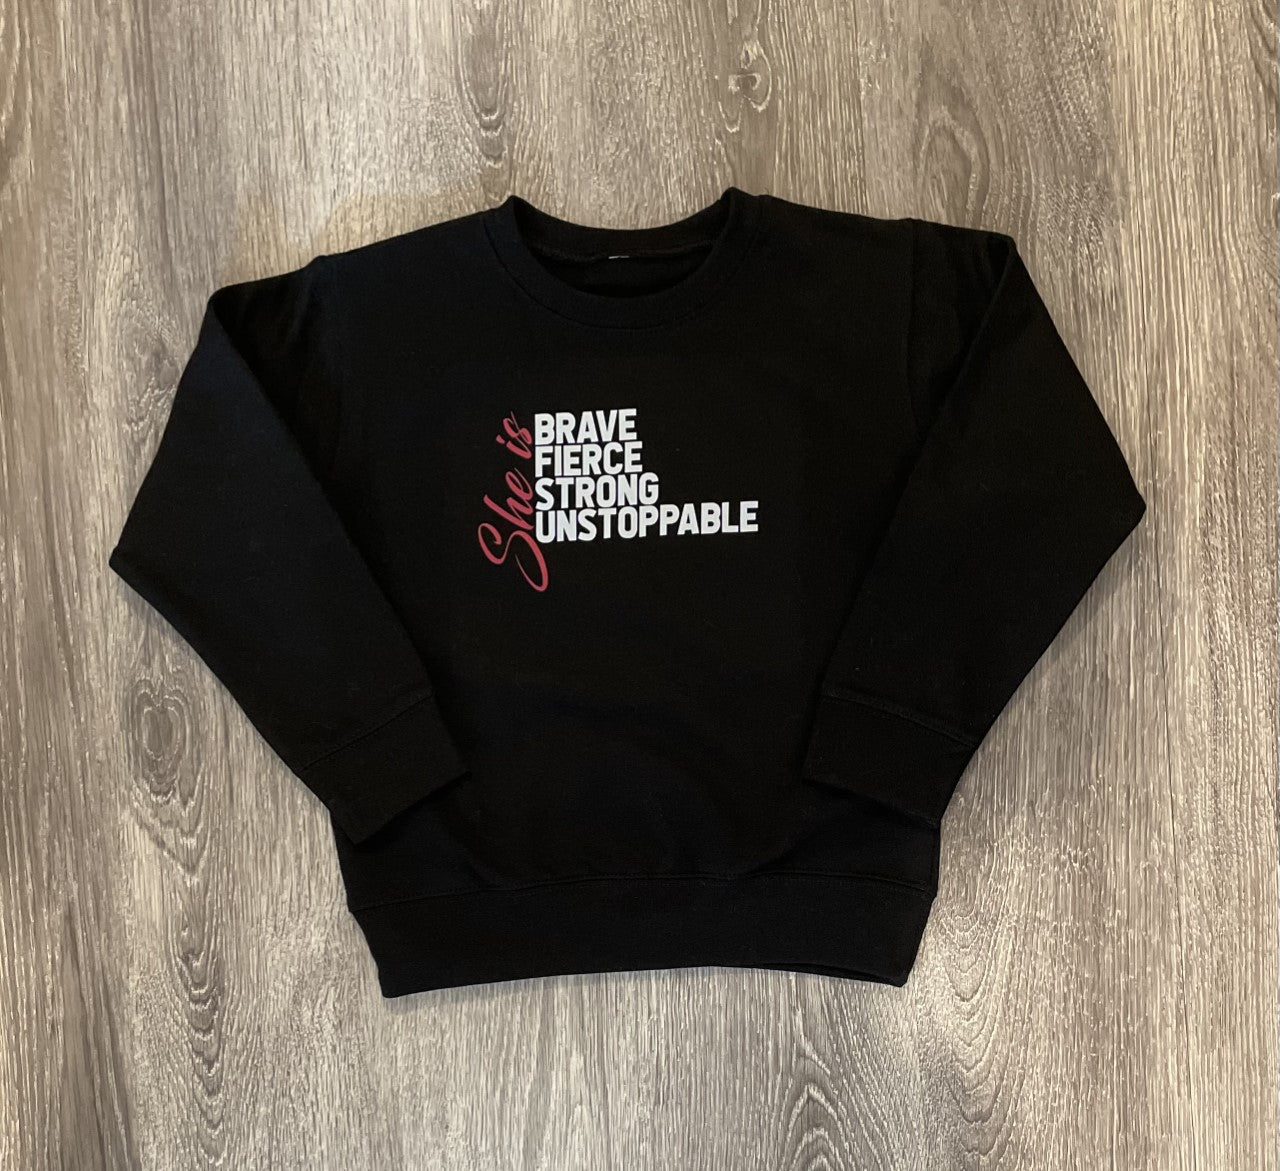 She is | Youth Crewneck